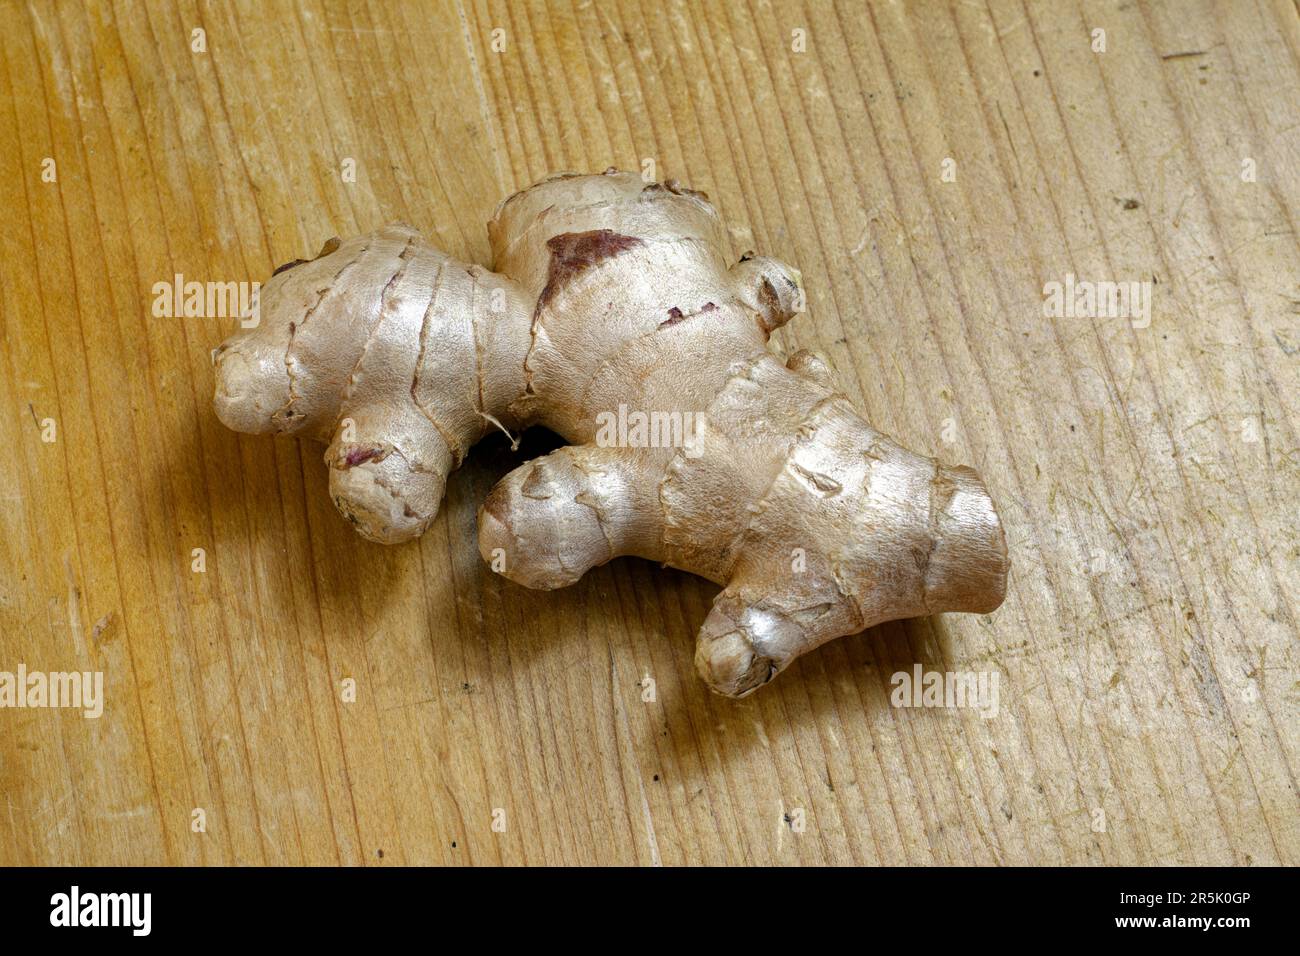 Kitchen ingredients, spice: root of ginger, isolated Stock Photo